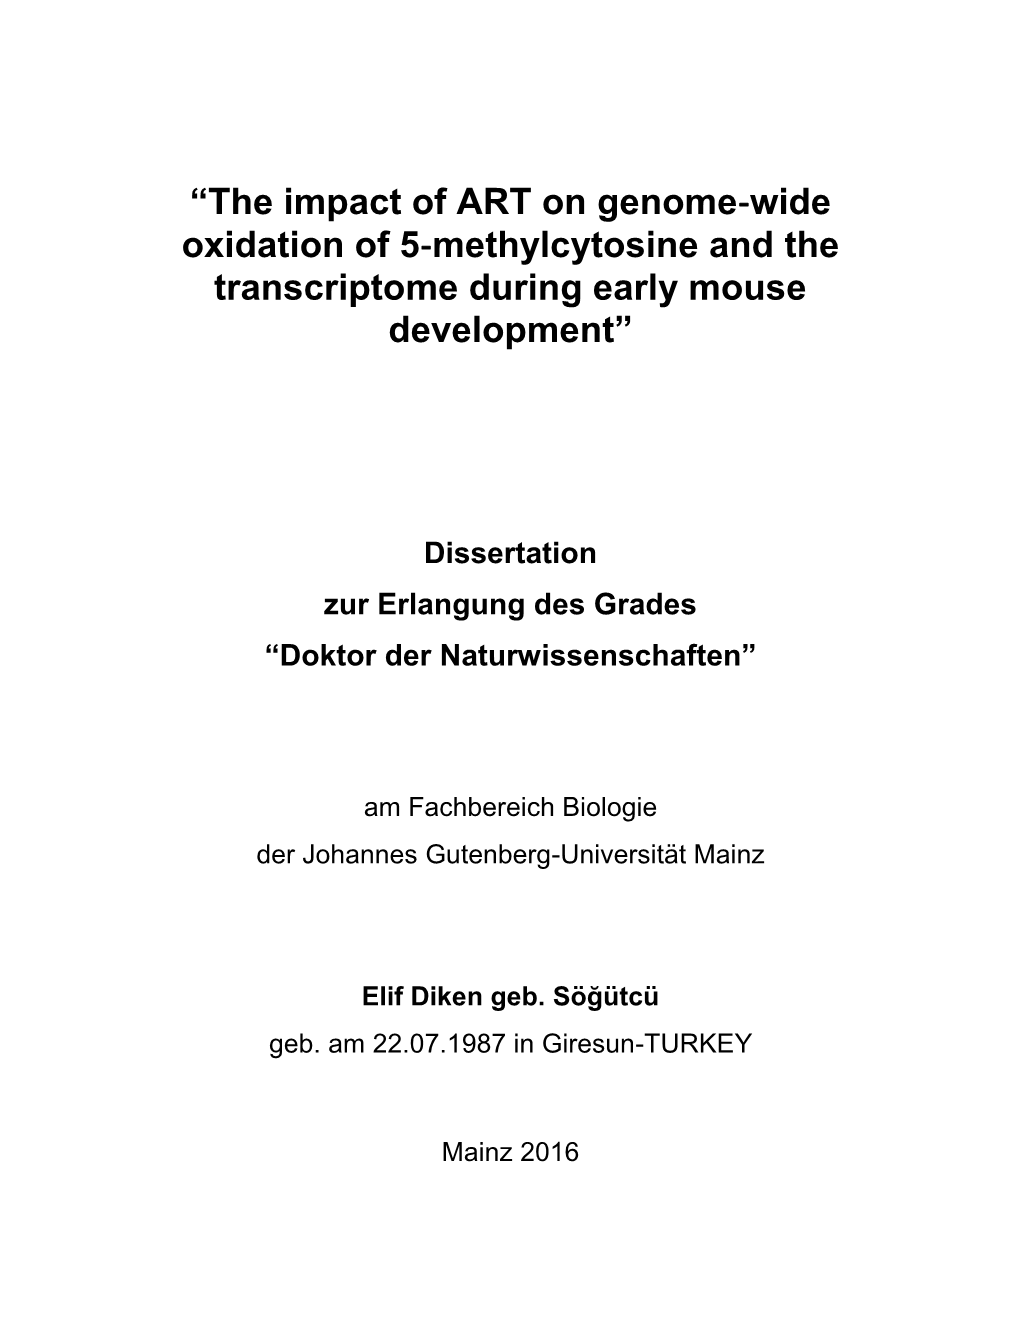 “The Impact of ART on Genome‐Wide Oxidation of 5‐Methylcytosine and the Transcriptome During Early Mouse Development”